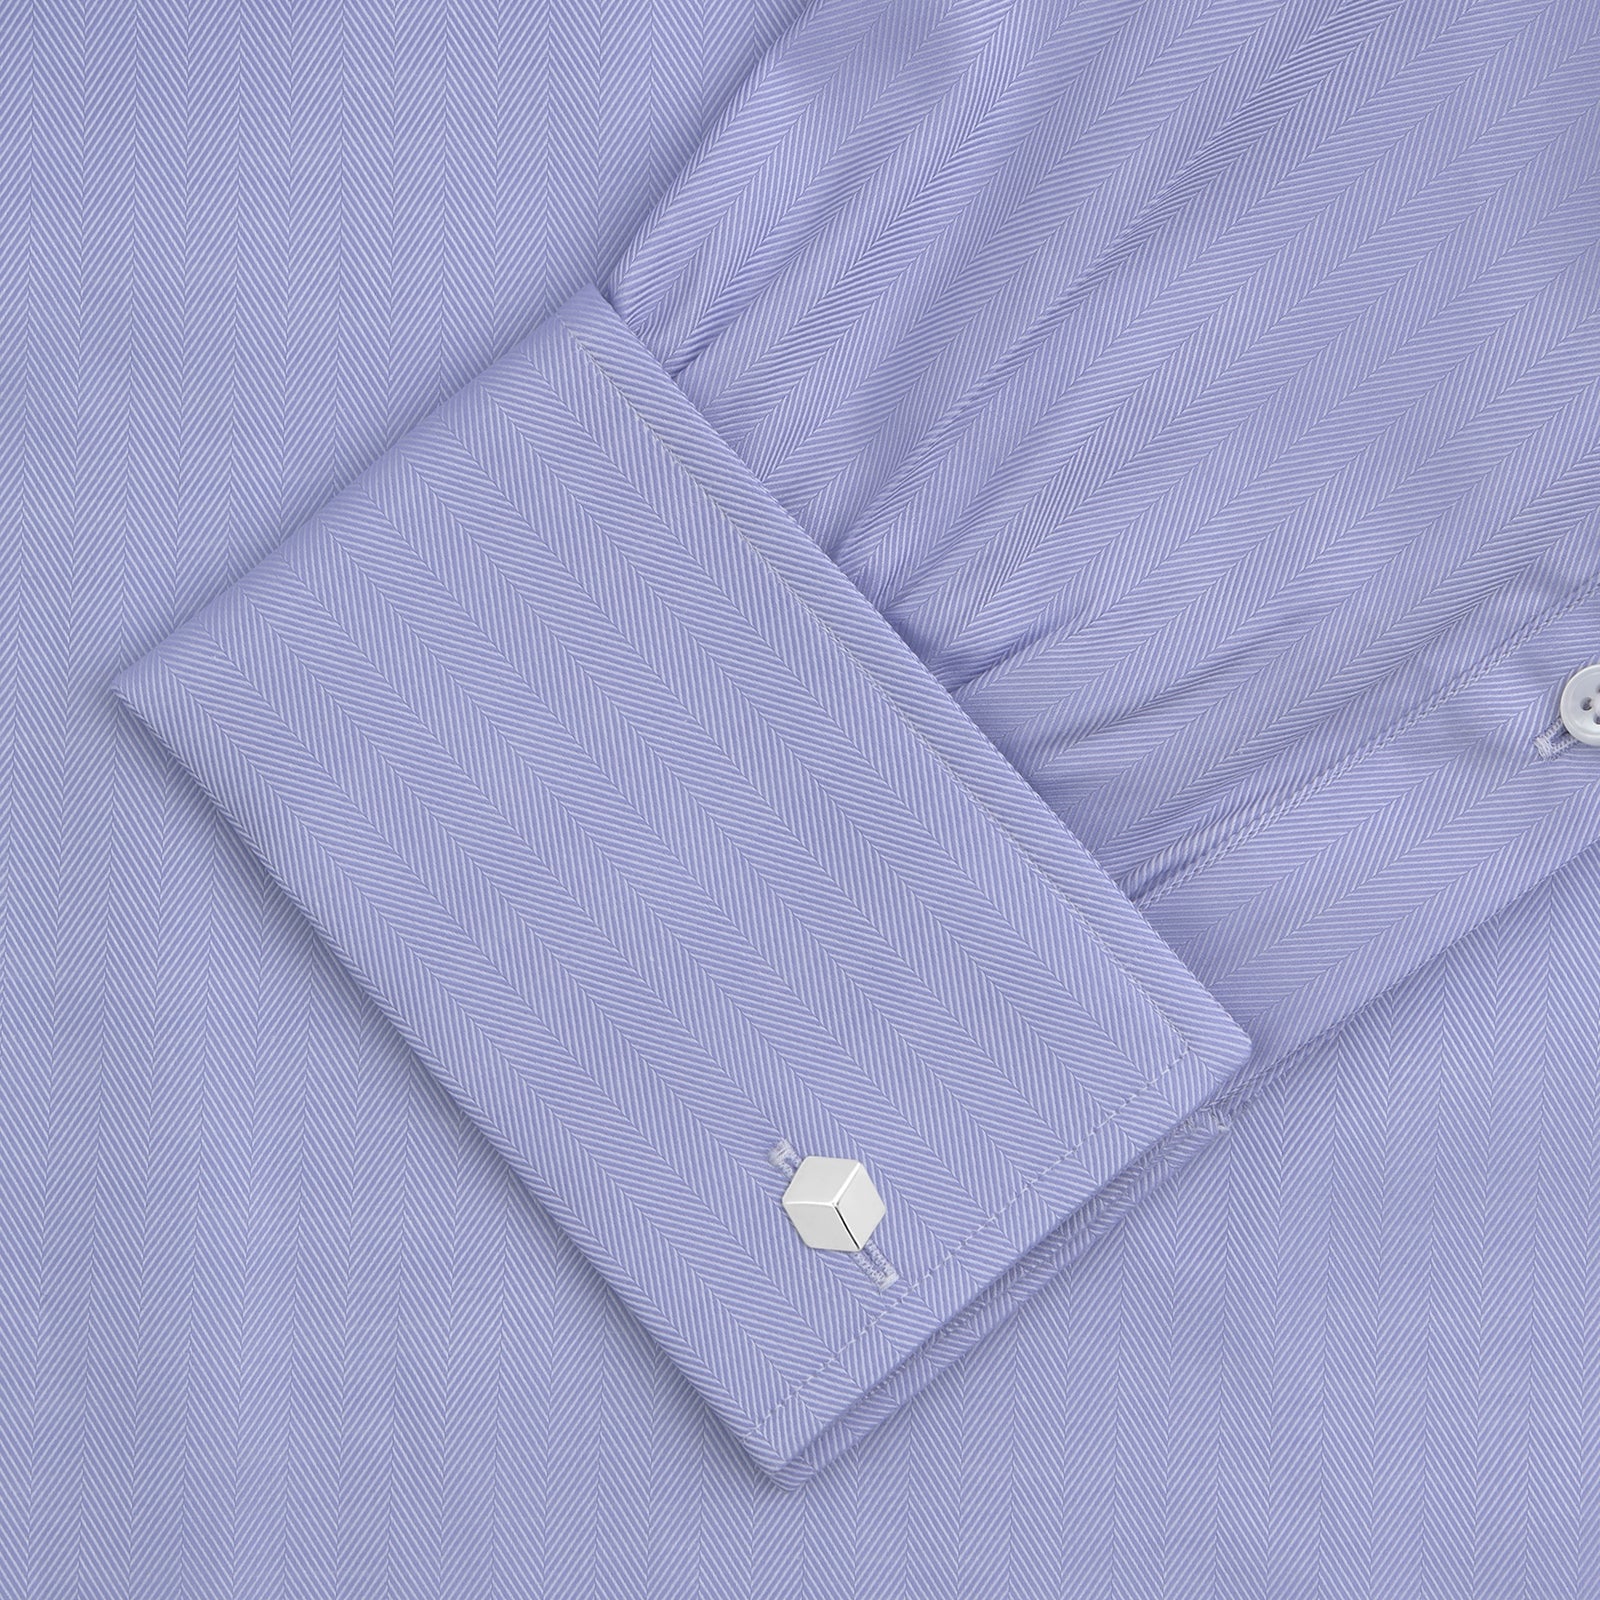 Light Blue Herringbone Sea Island Quality Cotton Shirt with T&A Collar and Double Cuffs